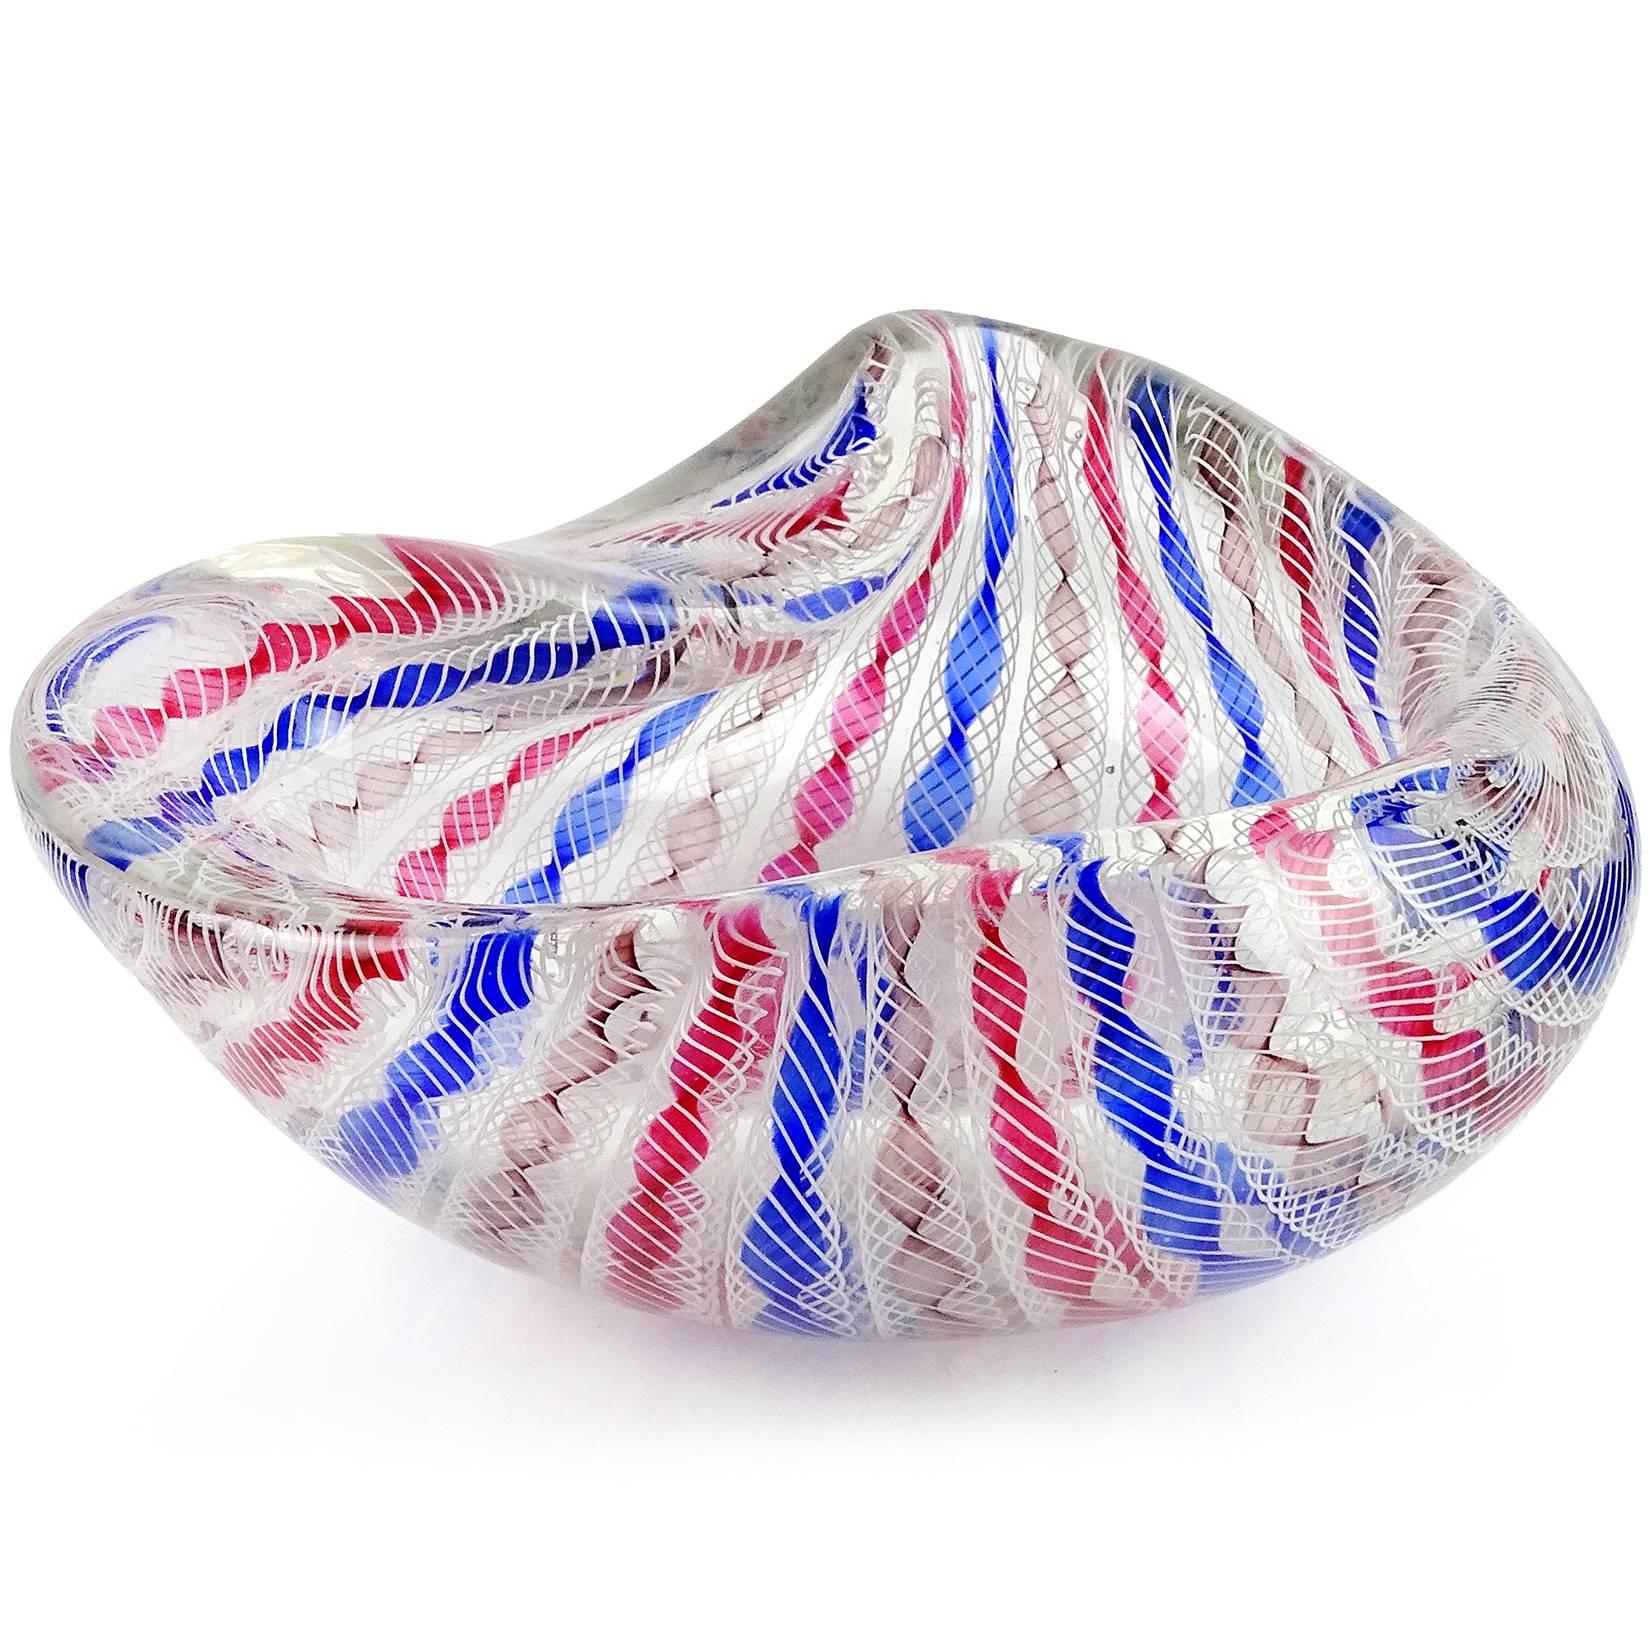 Beautiful large Murano hand blown Zanfirico twisted ribbon Italian art glass bowl. Documented to designer Archimede Seguso, circa 1950s. Has pink, blue and purple twisted ribbons, with twisted white net over them. Has a biomorphic shape and very